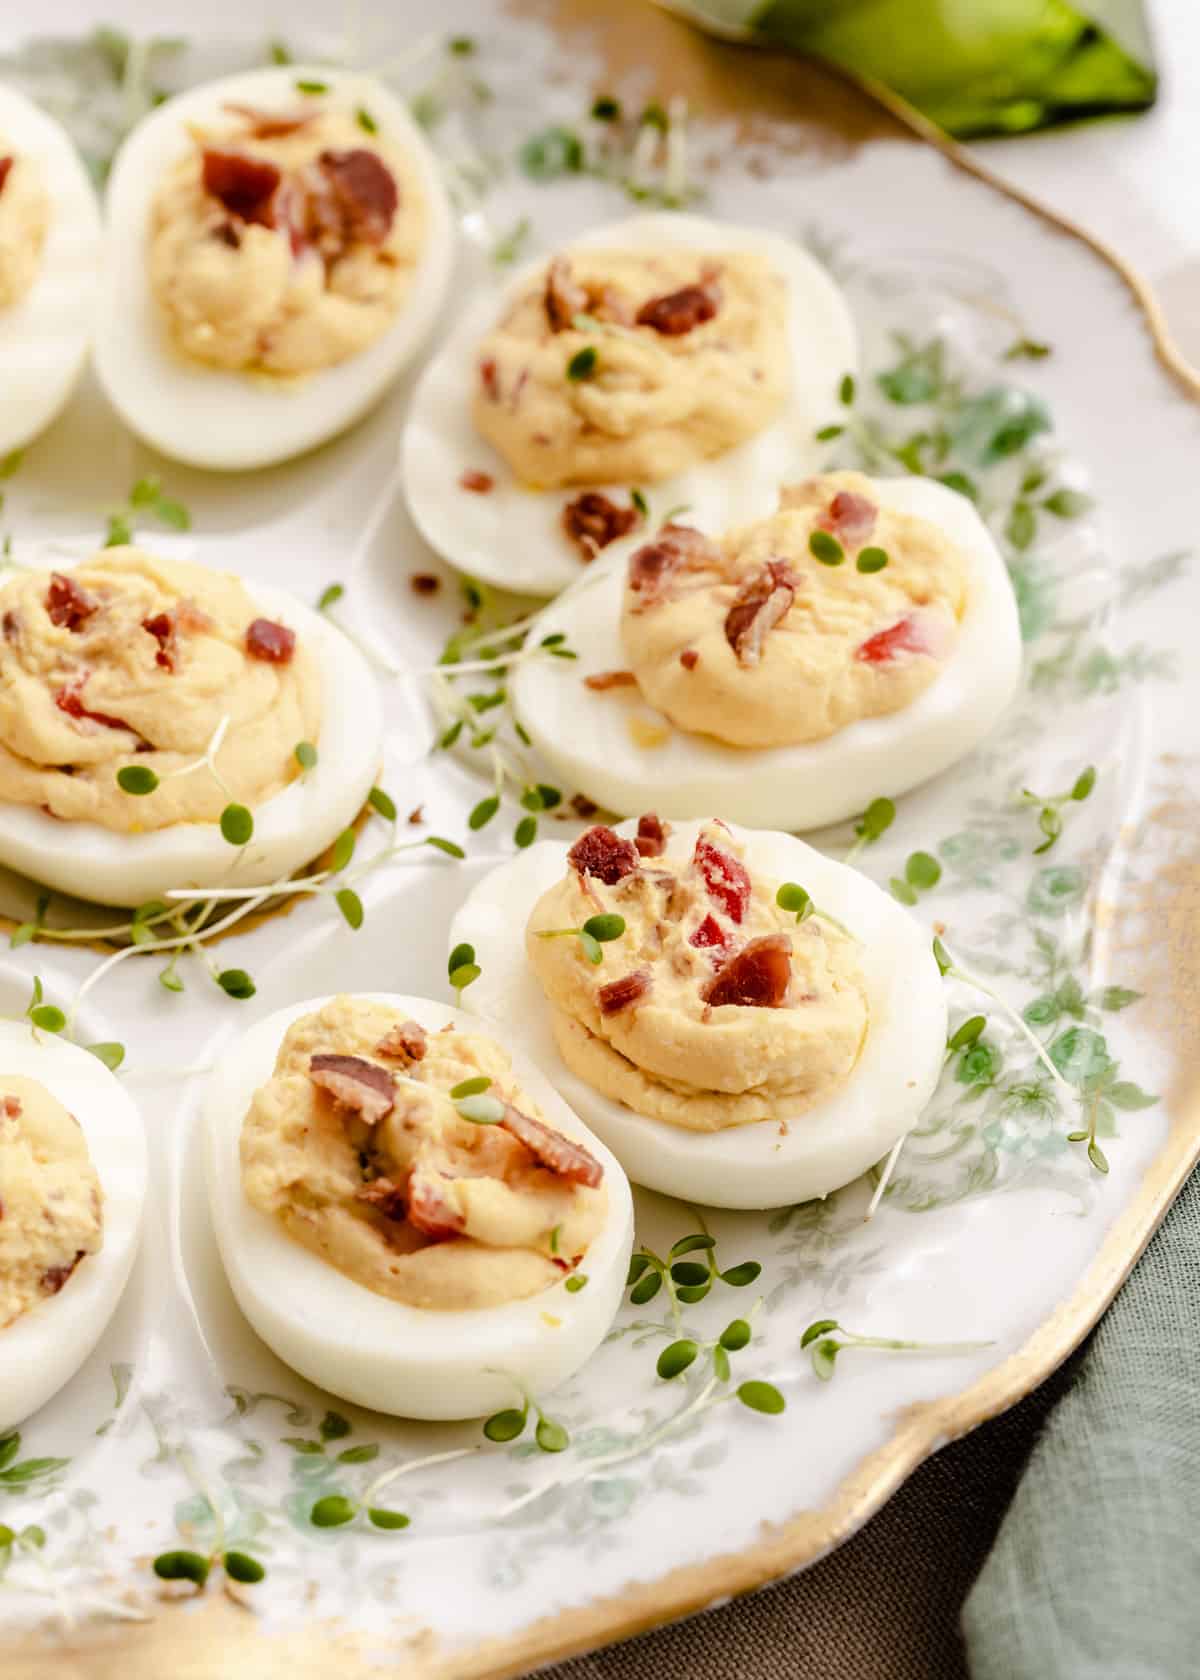 deviled eggs topped with bacon sitting on vintage plate, close up view.